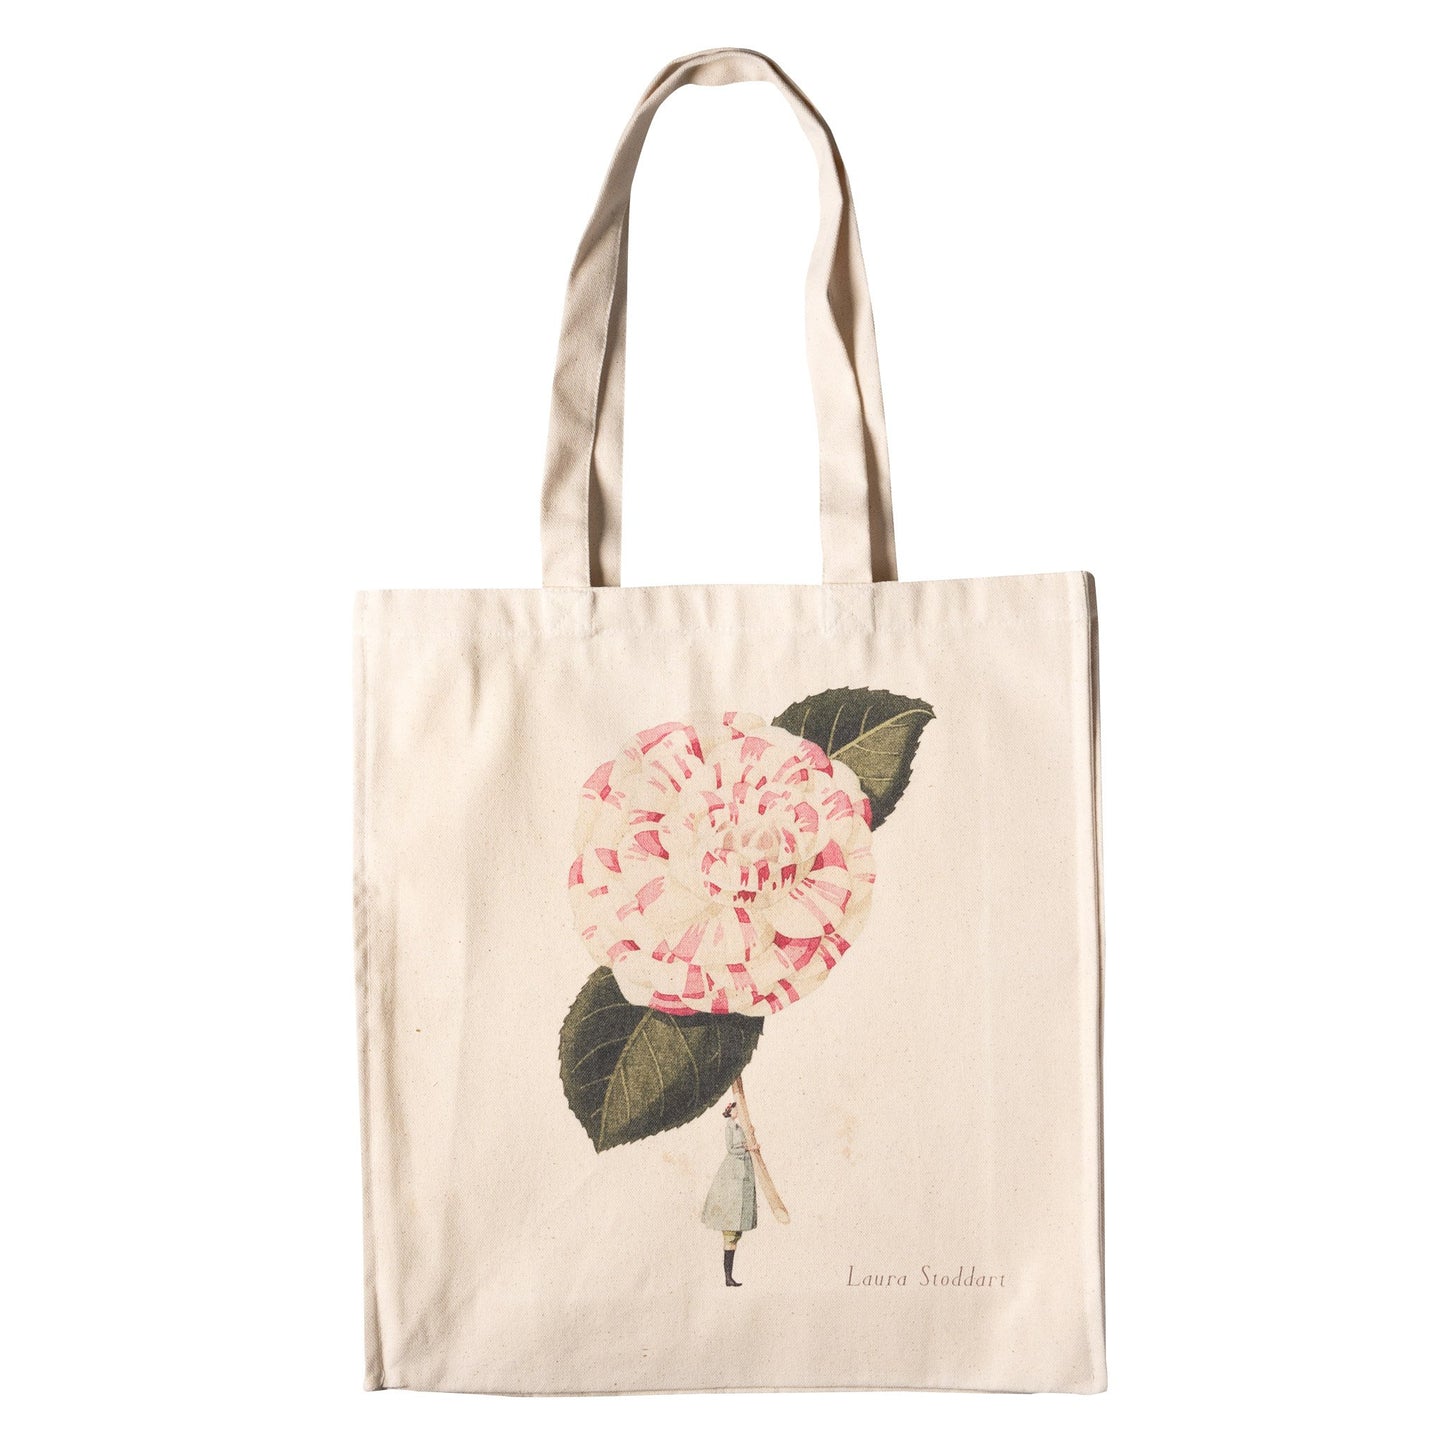 heavyweight cotton bag, made in England, illustration, unbleached cotton, flowers, camellia, bag